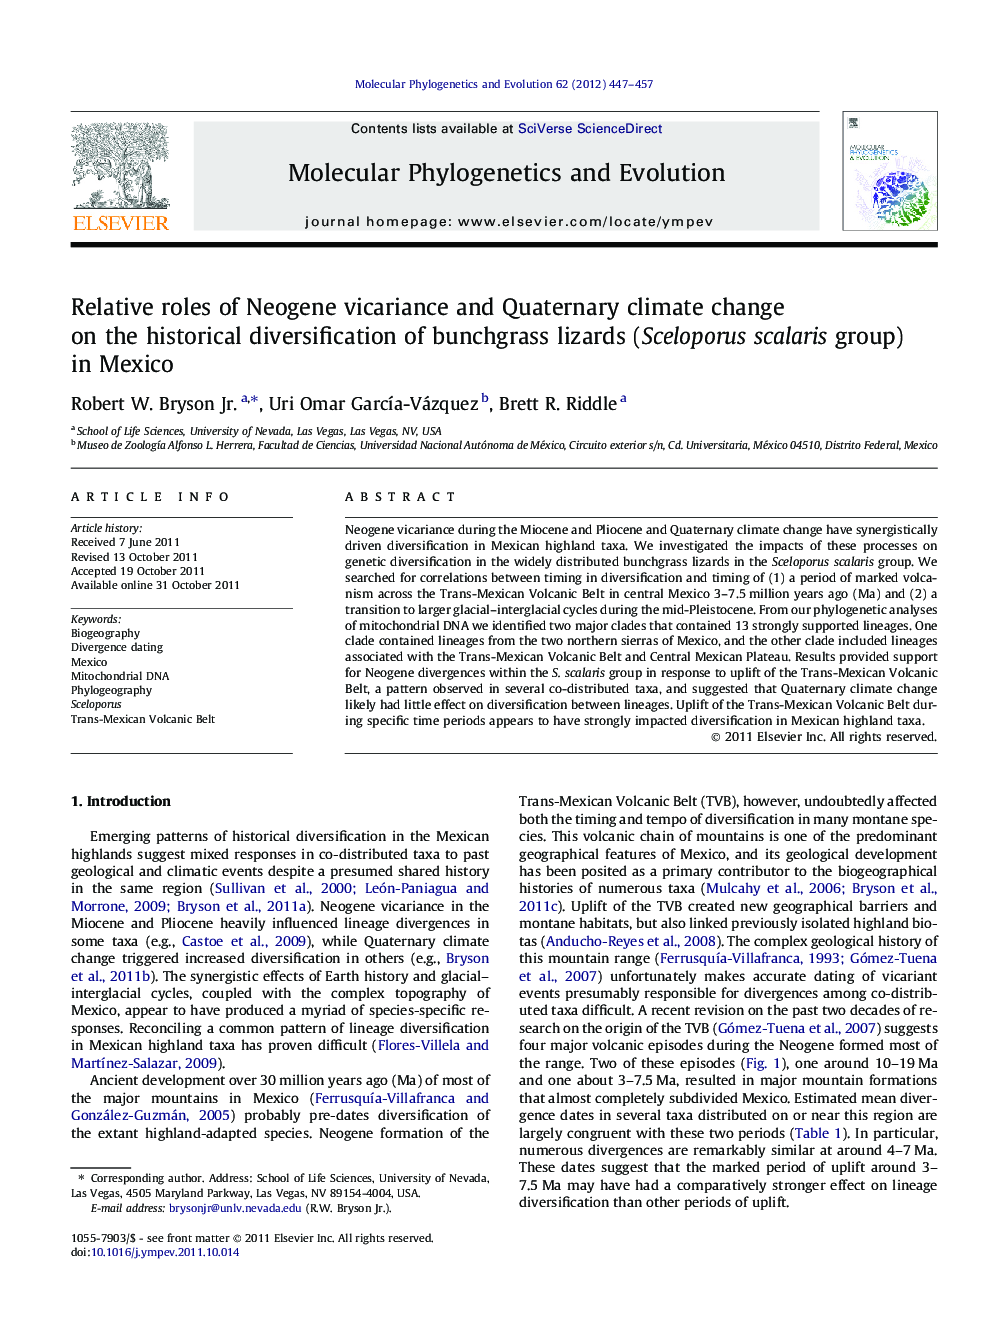 Relative roles of Neogene vicariance and Quaternary climate change on the historical diversification of bunchgrass lizards (Sceloporus scalaris group) in Mexico